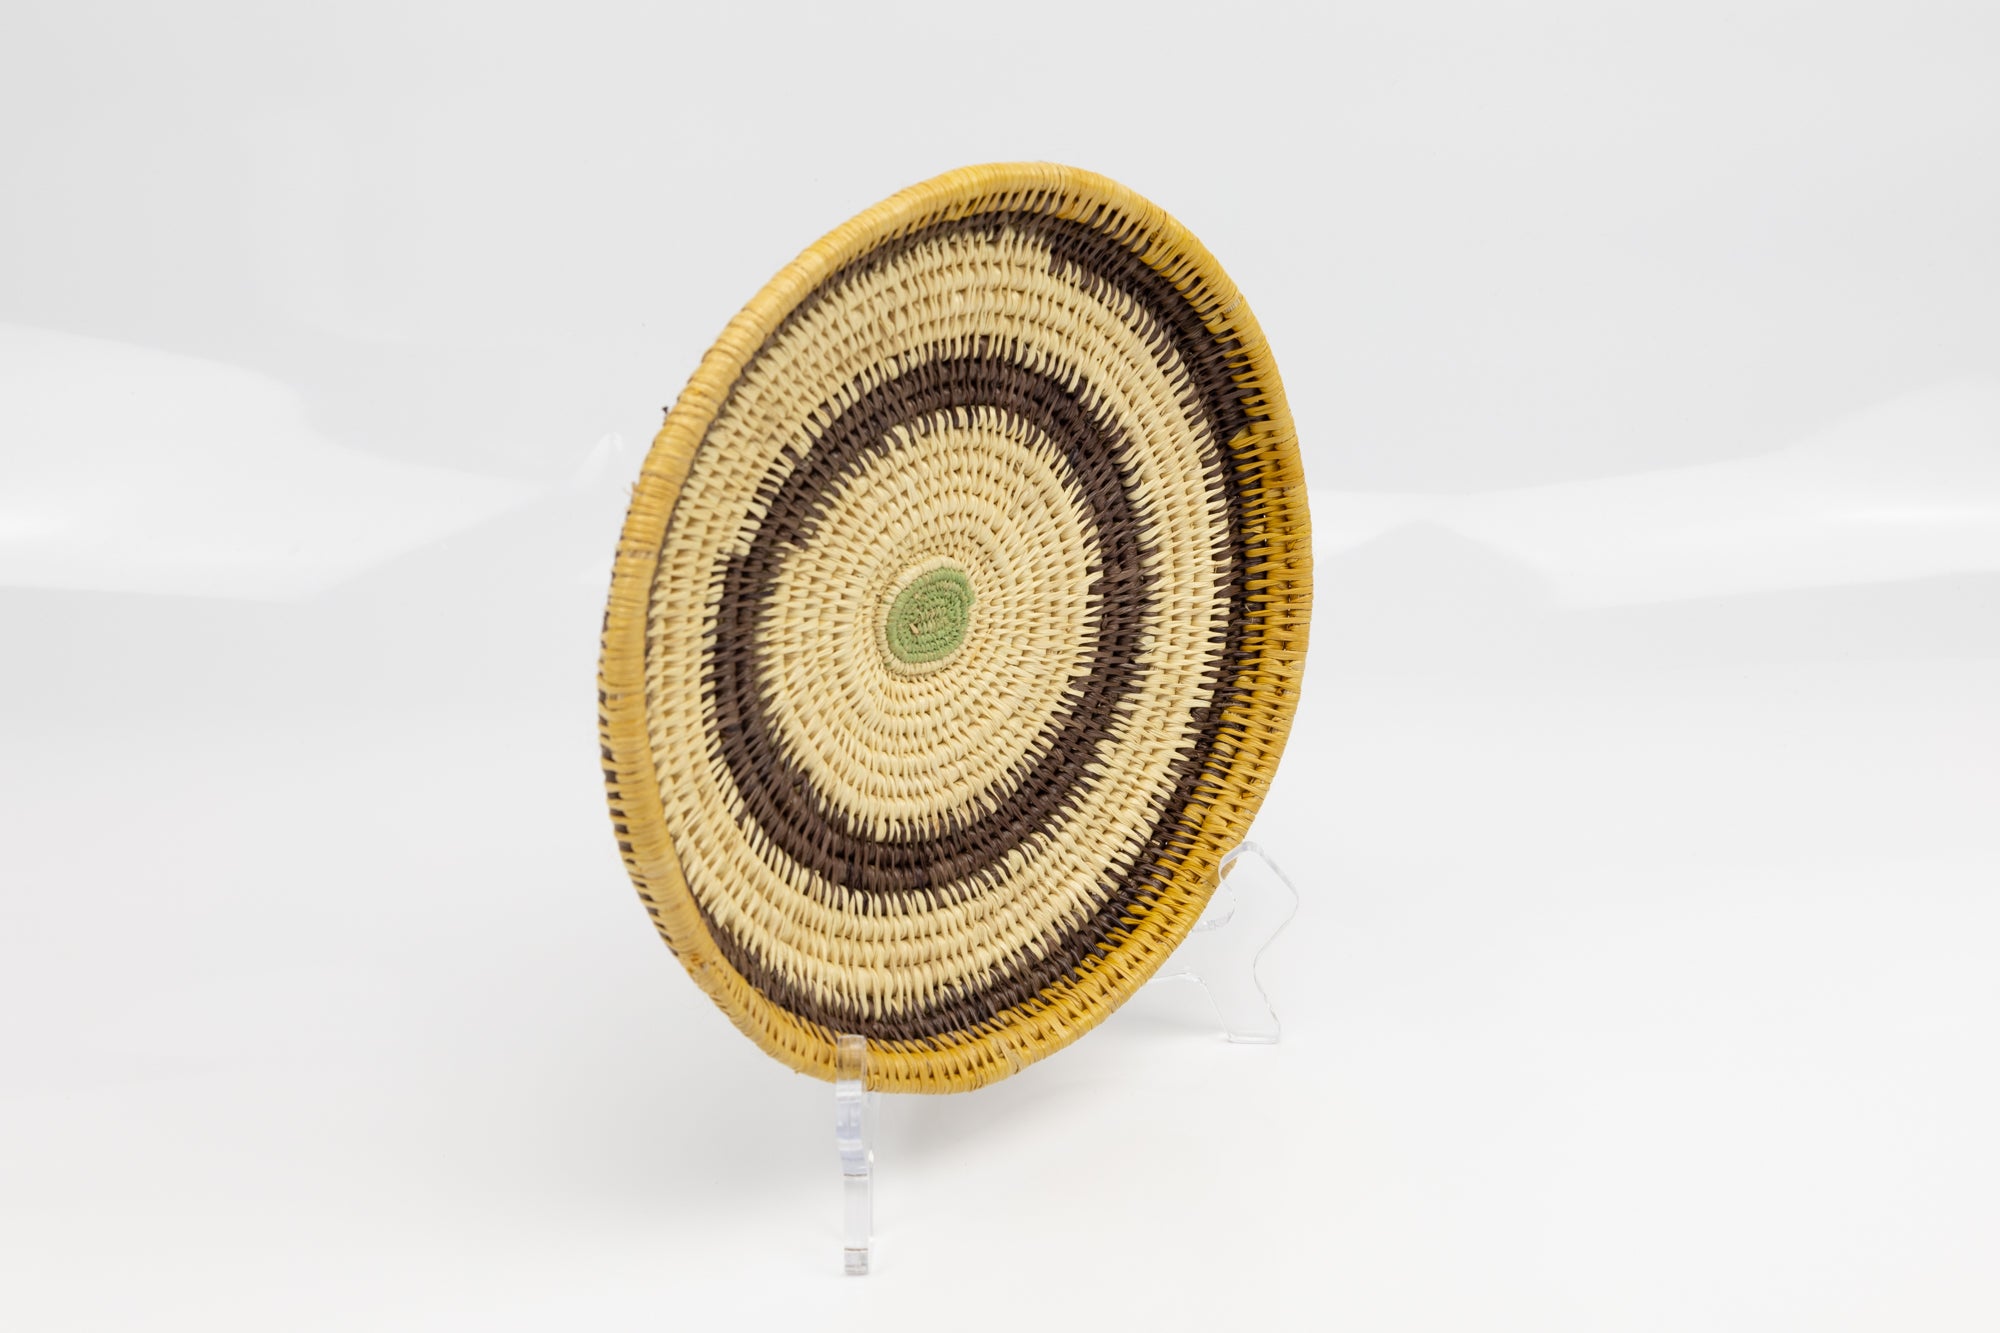 Hand woven plate basket. Palm fiber and natural dyes. Woven in Panama. colors brown and green.